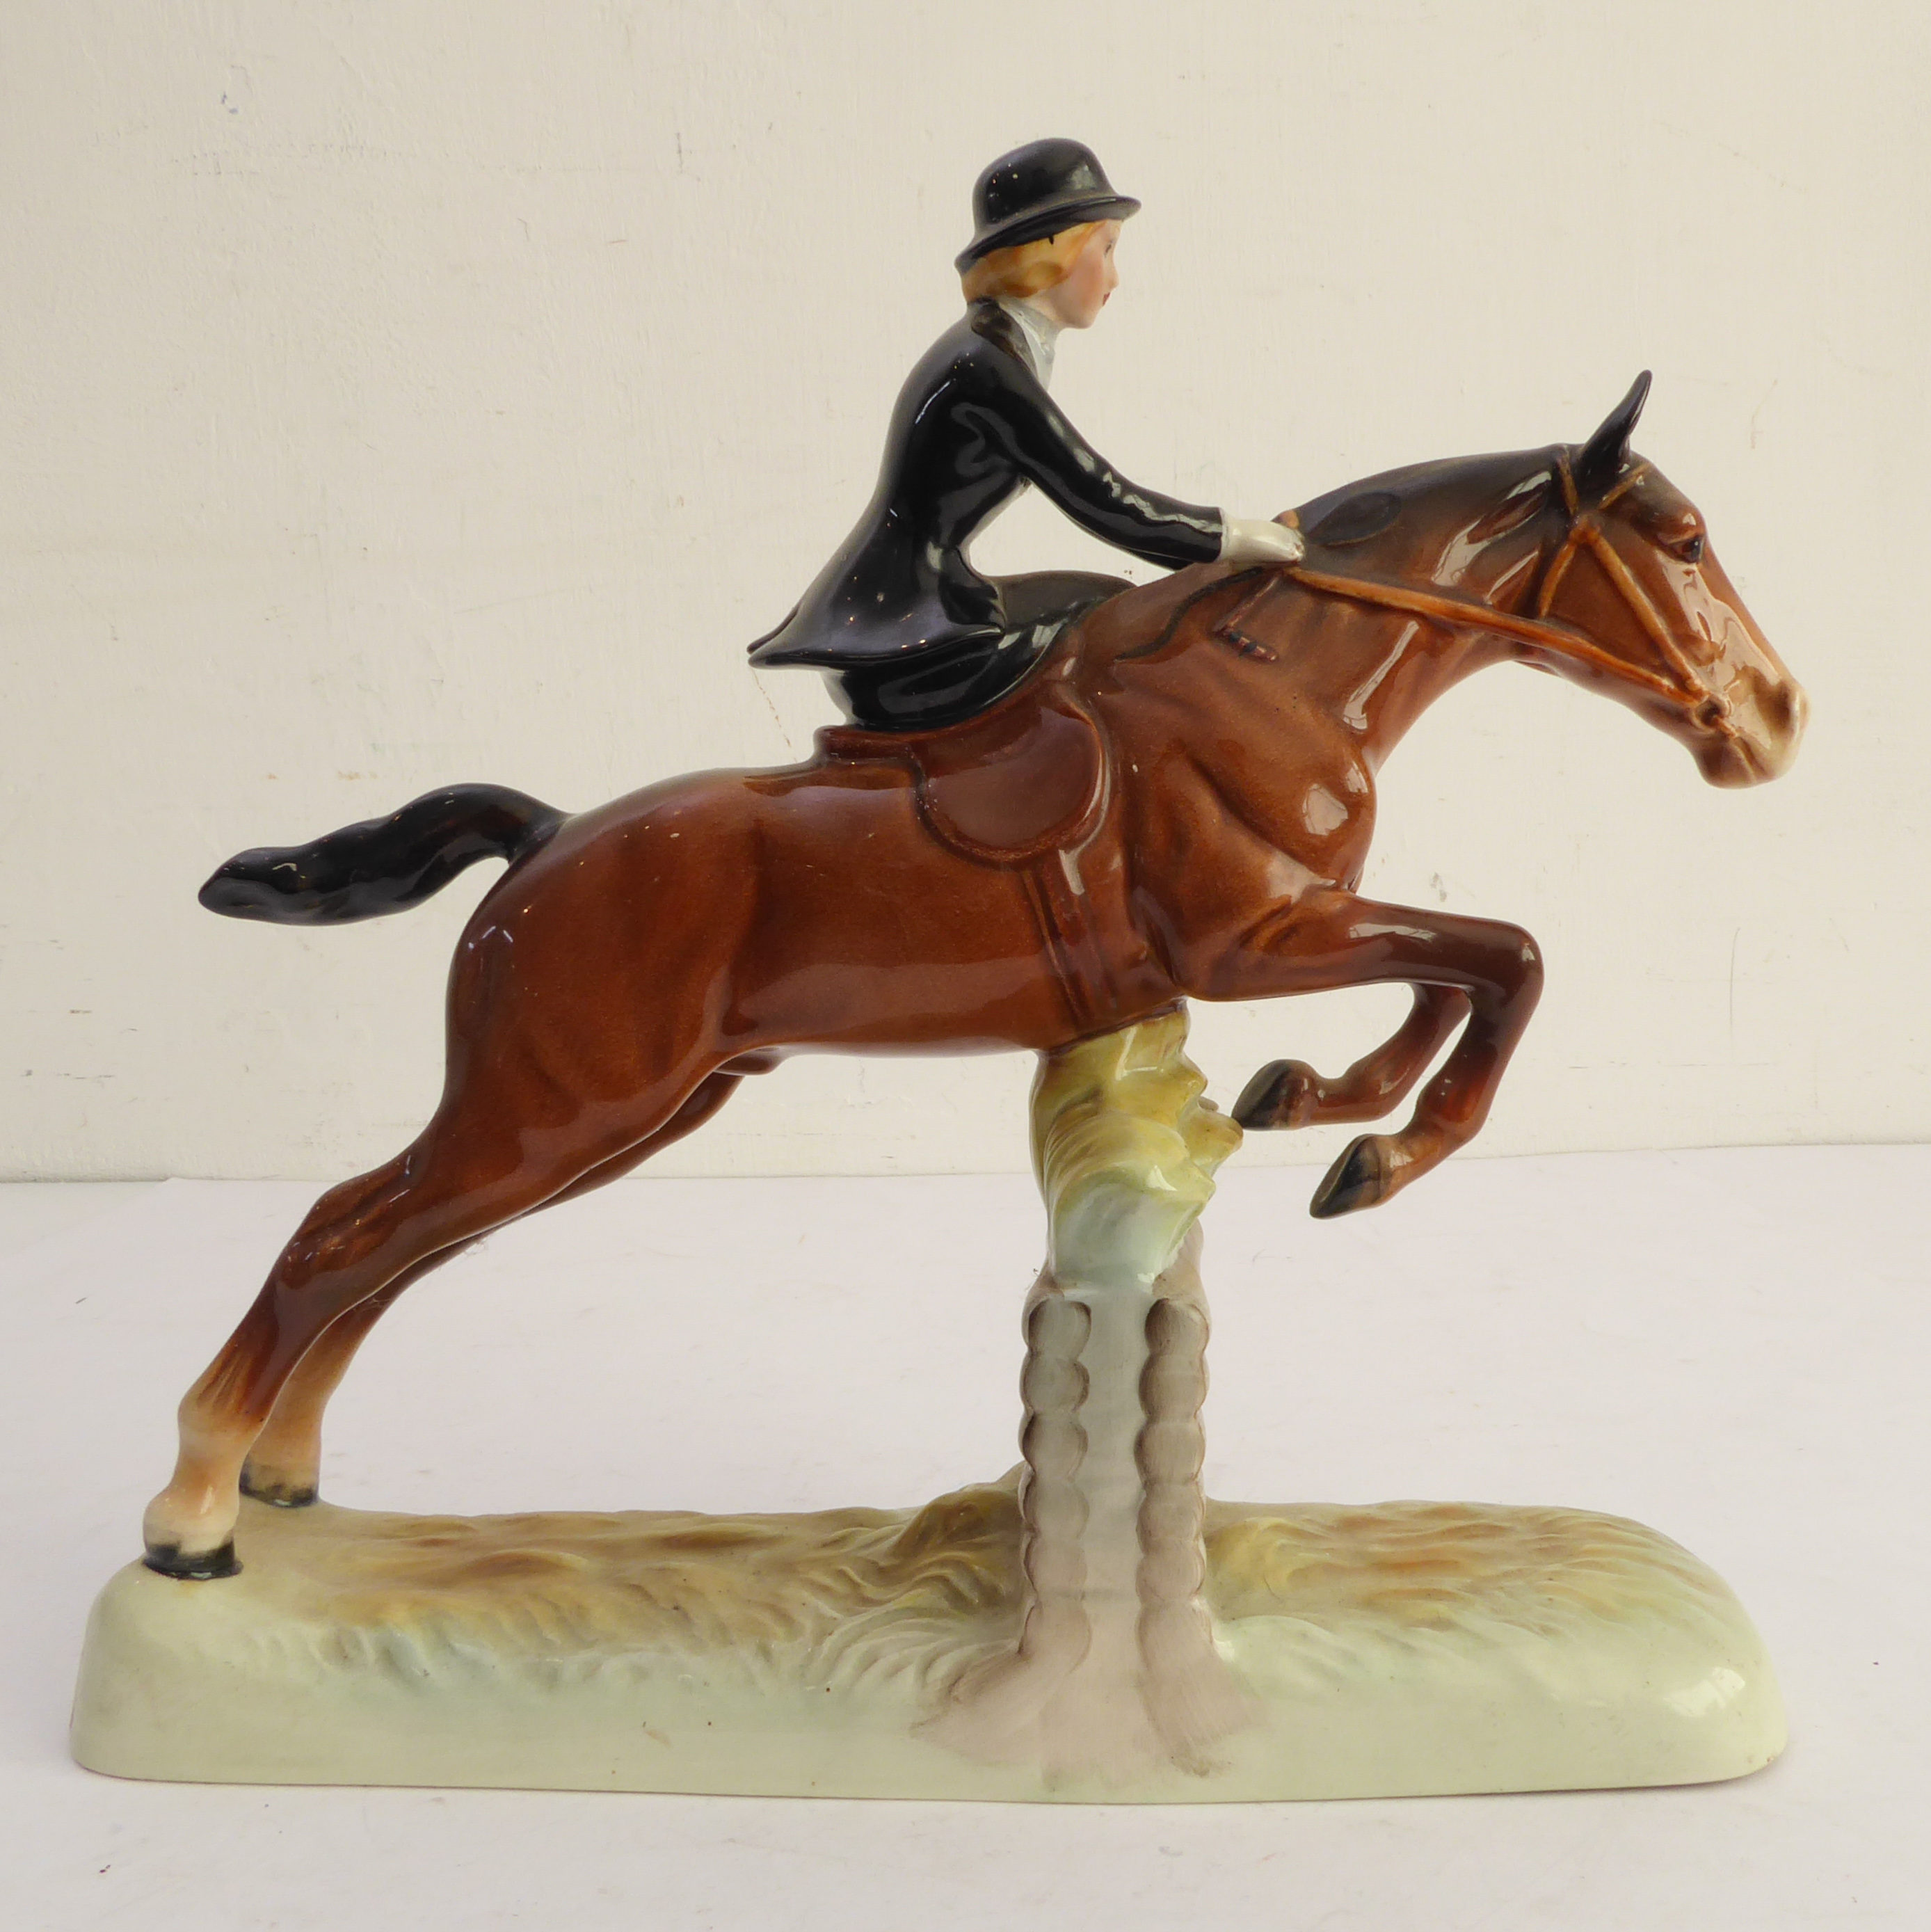 A hand-decorated Beswick model of a lady jumping a six-log fence side-saddle - printed and painted - Image 2 of 5